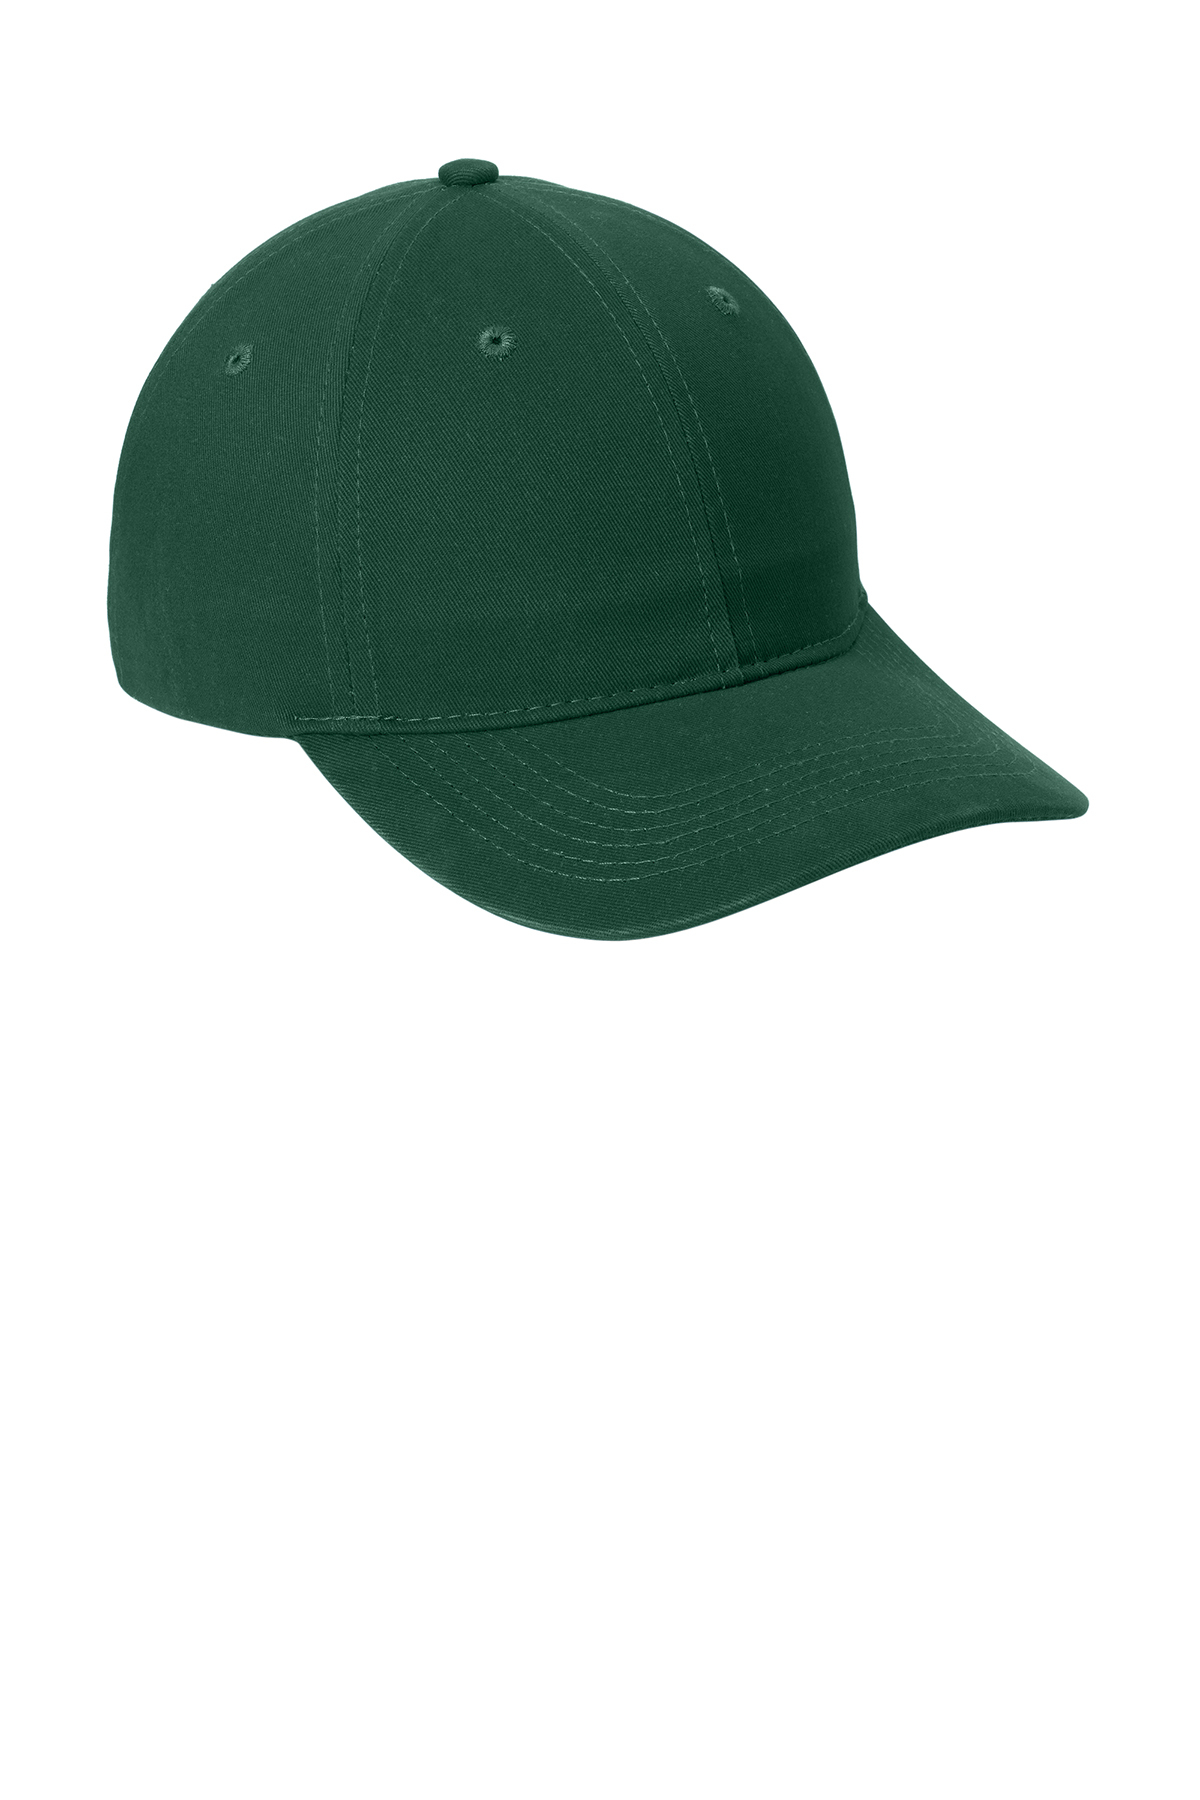 Port & Company - Brushed Twill Low Profile Cap | Product | SanMar